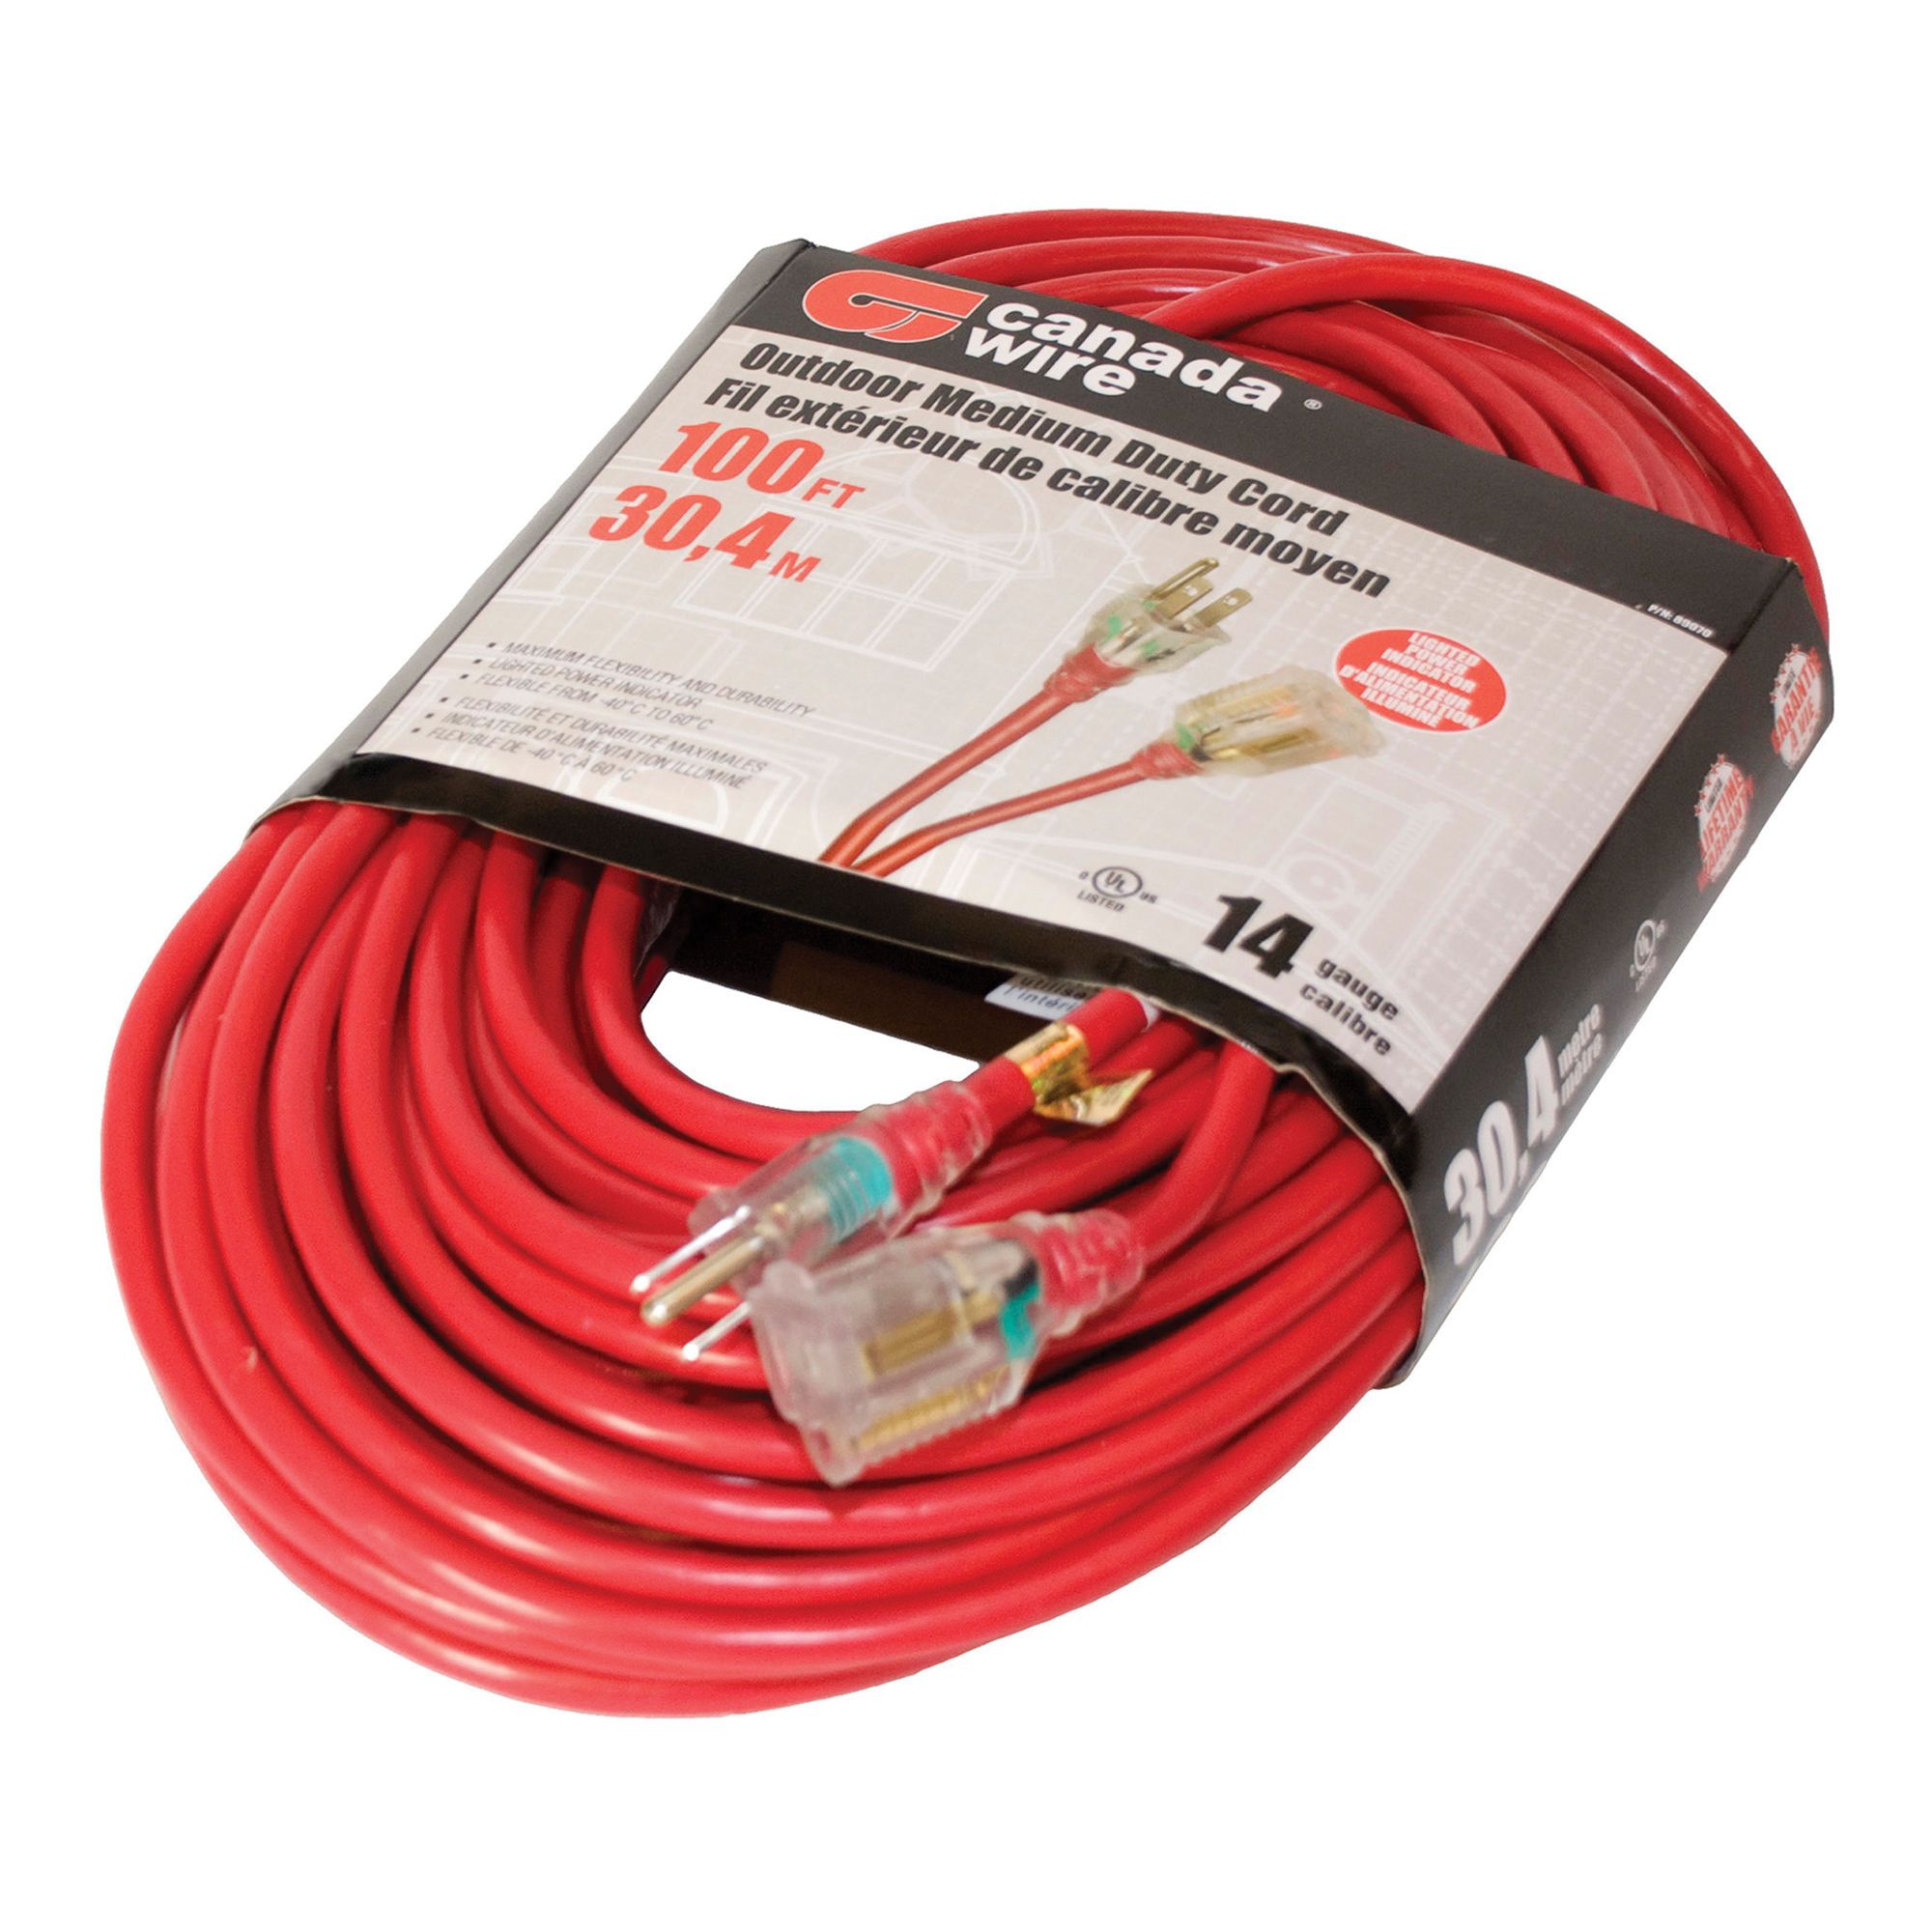 Woods Metal Extension Cord Reel Stand with 16/3 100ft Orange Extension Cord